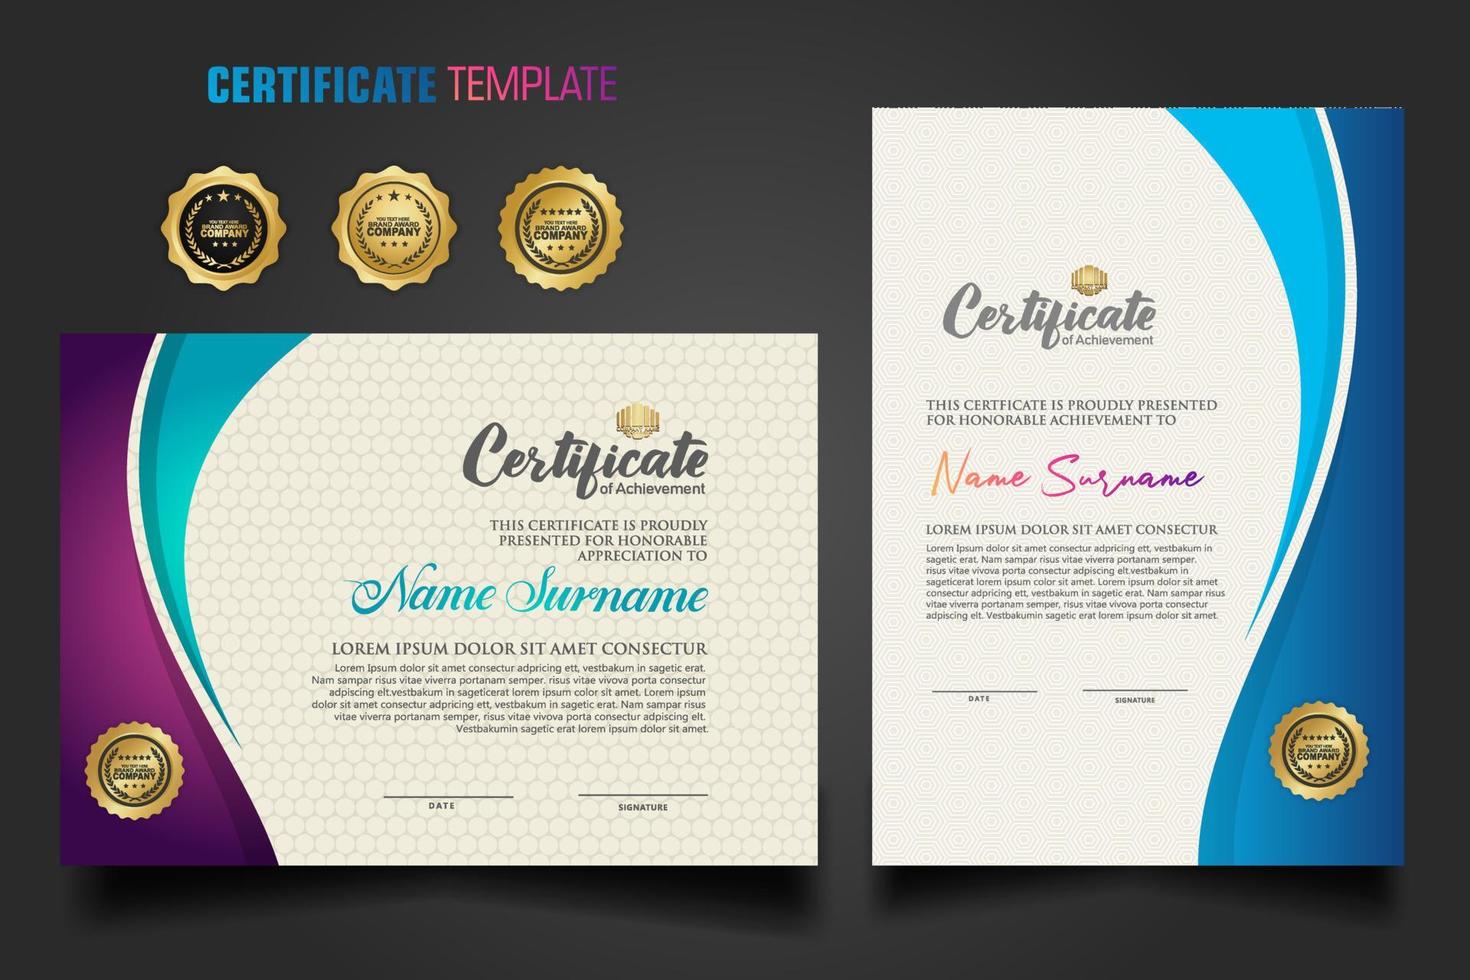 Modern certificate template with dynamic colorful waving shape on  ornament  pattern background vector